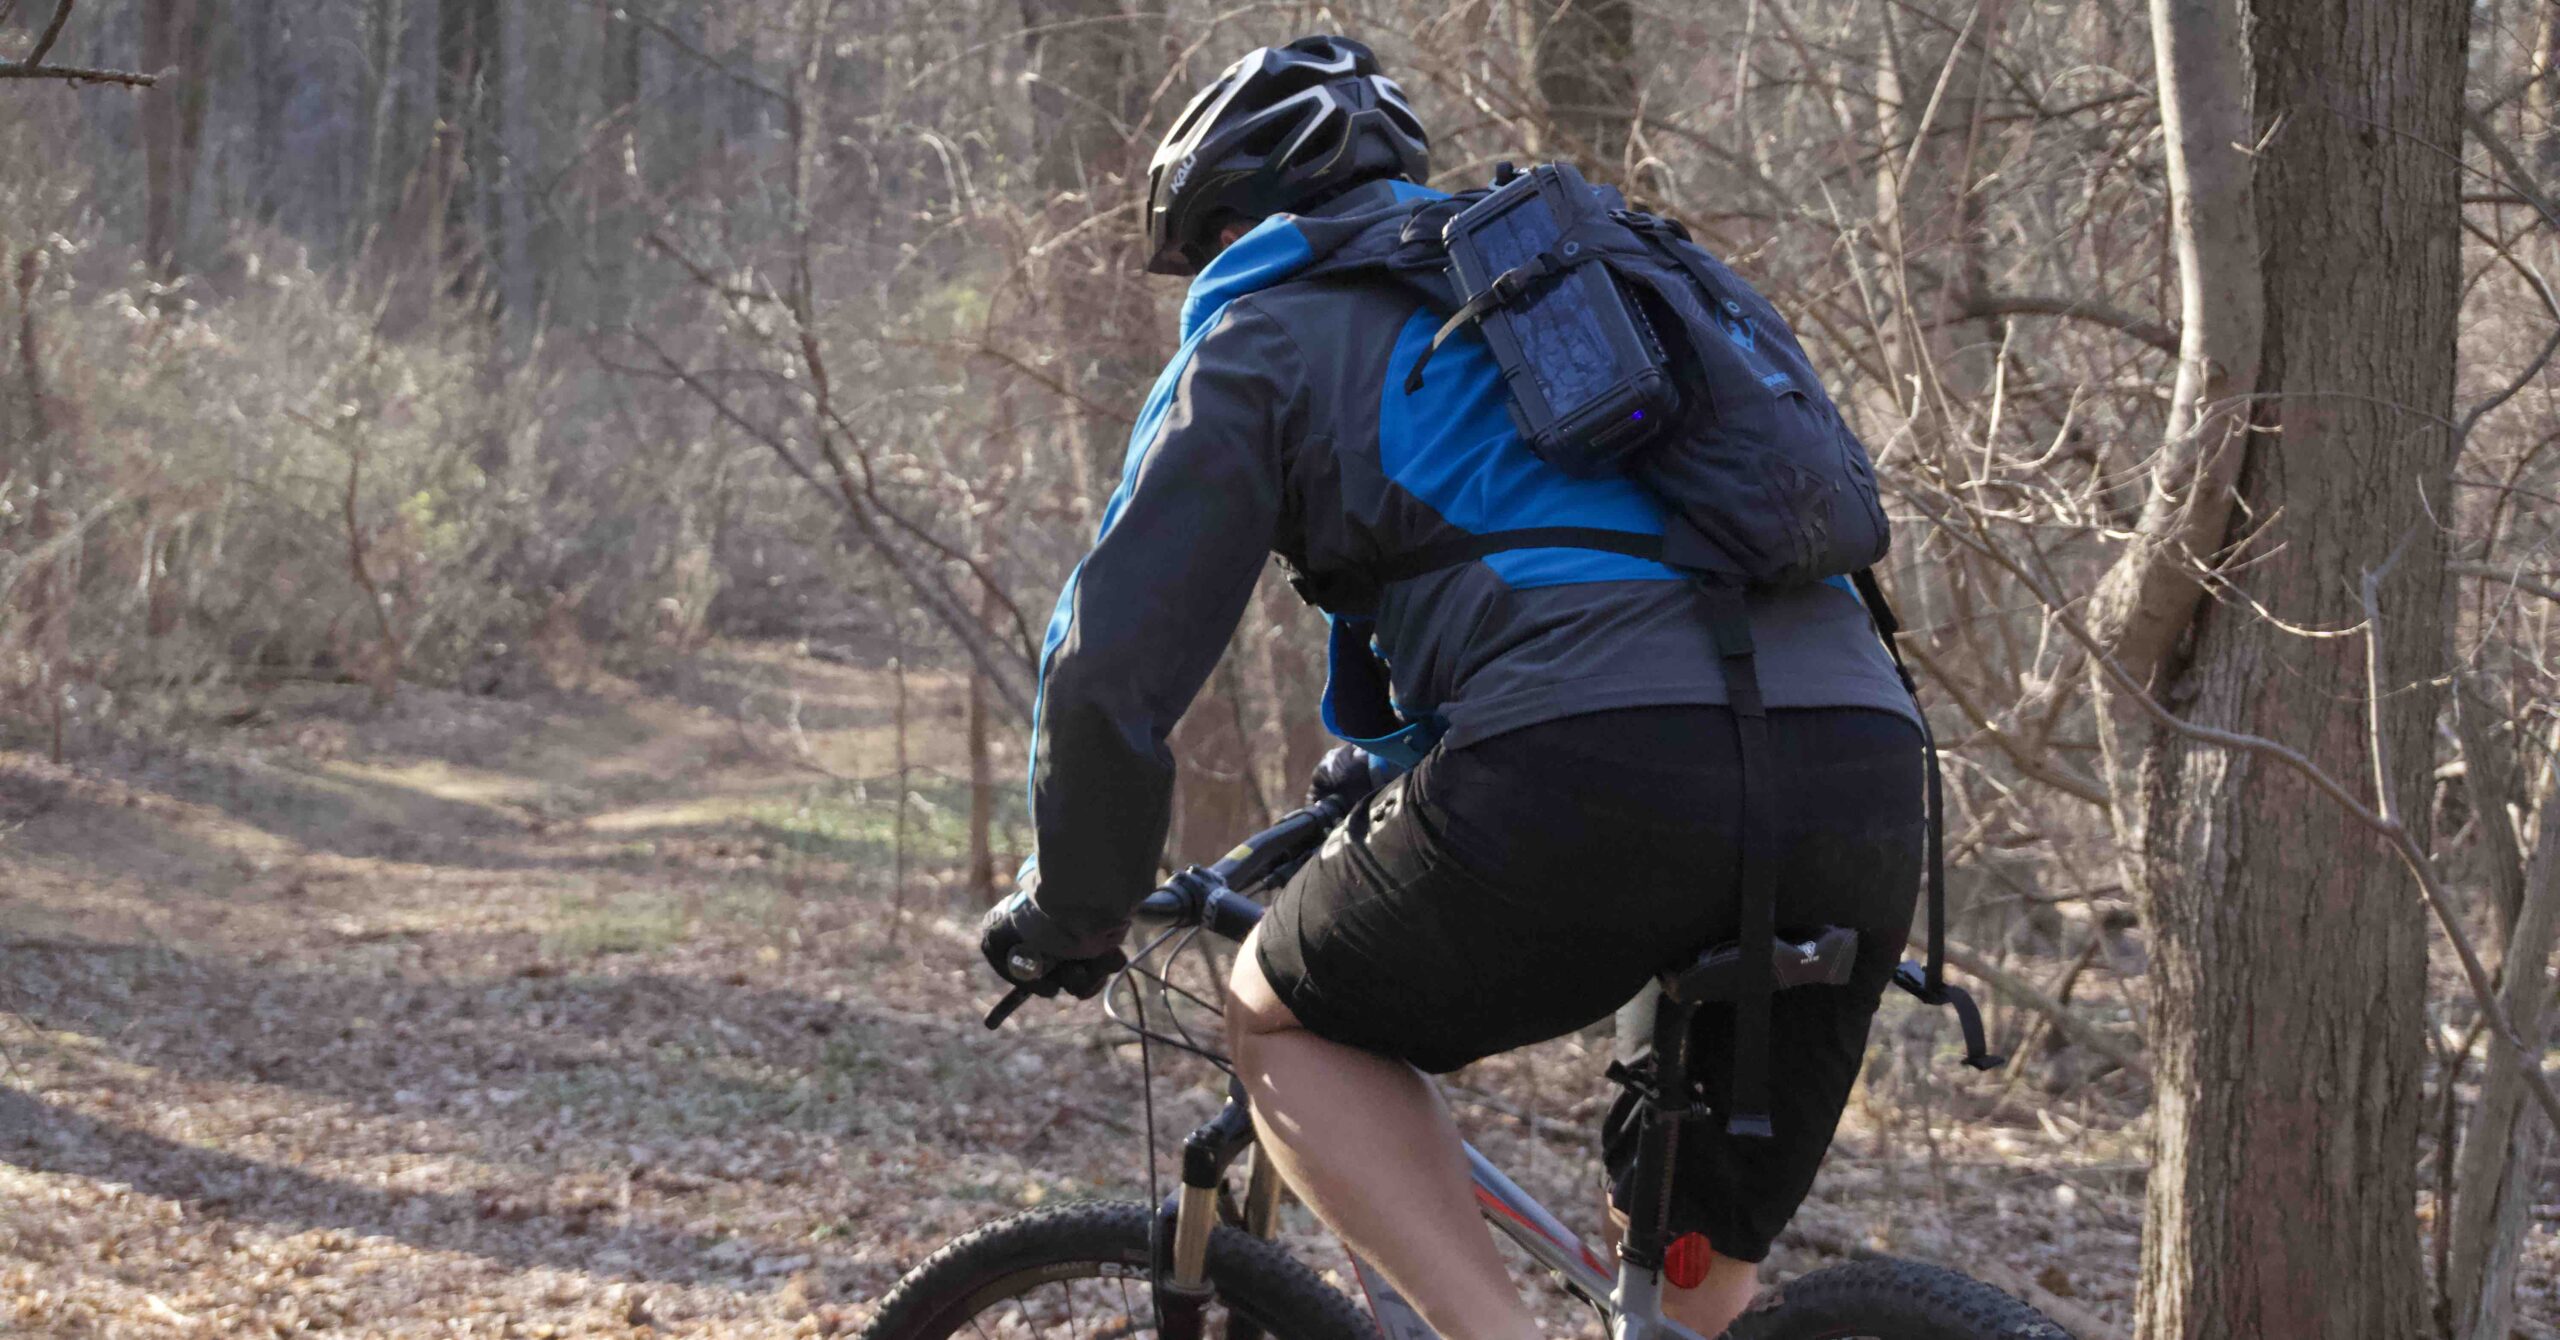 Your Mountain Bike requires the right gear and preparation